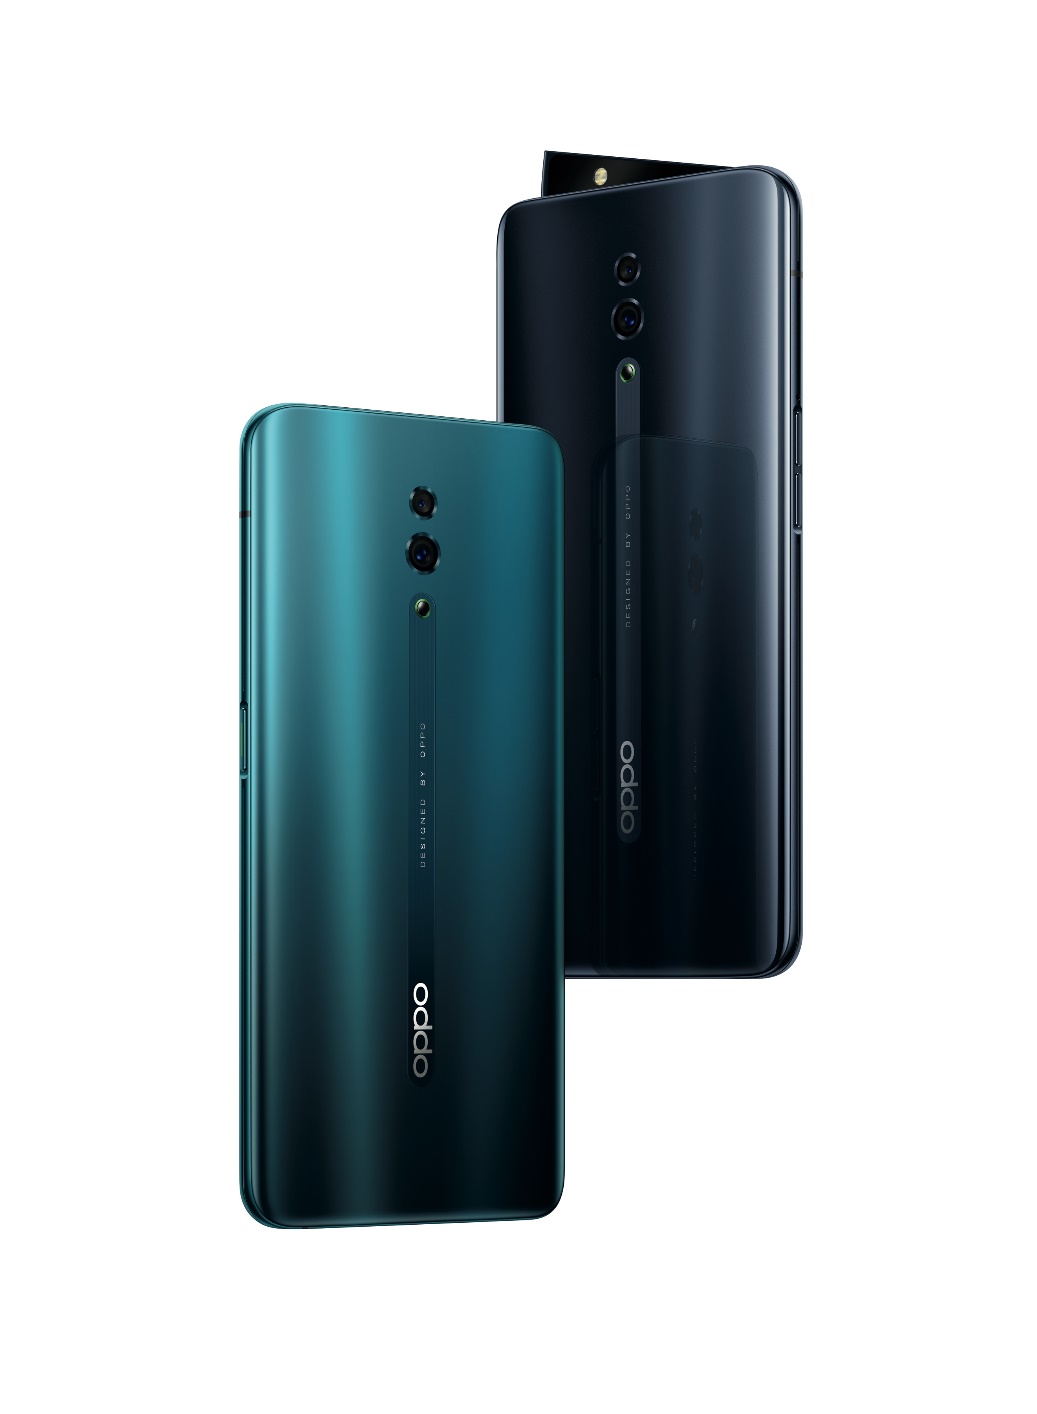 Oppo Reno Series Launched in Europe With 5G and 10x Hybrid Zoom